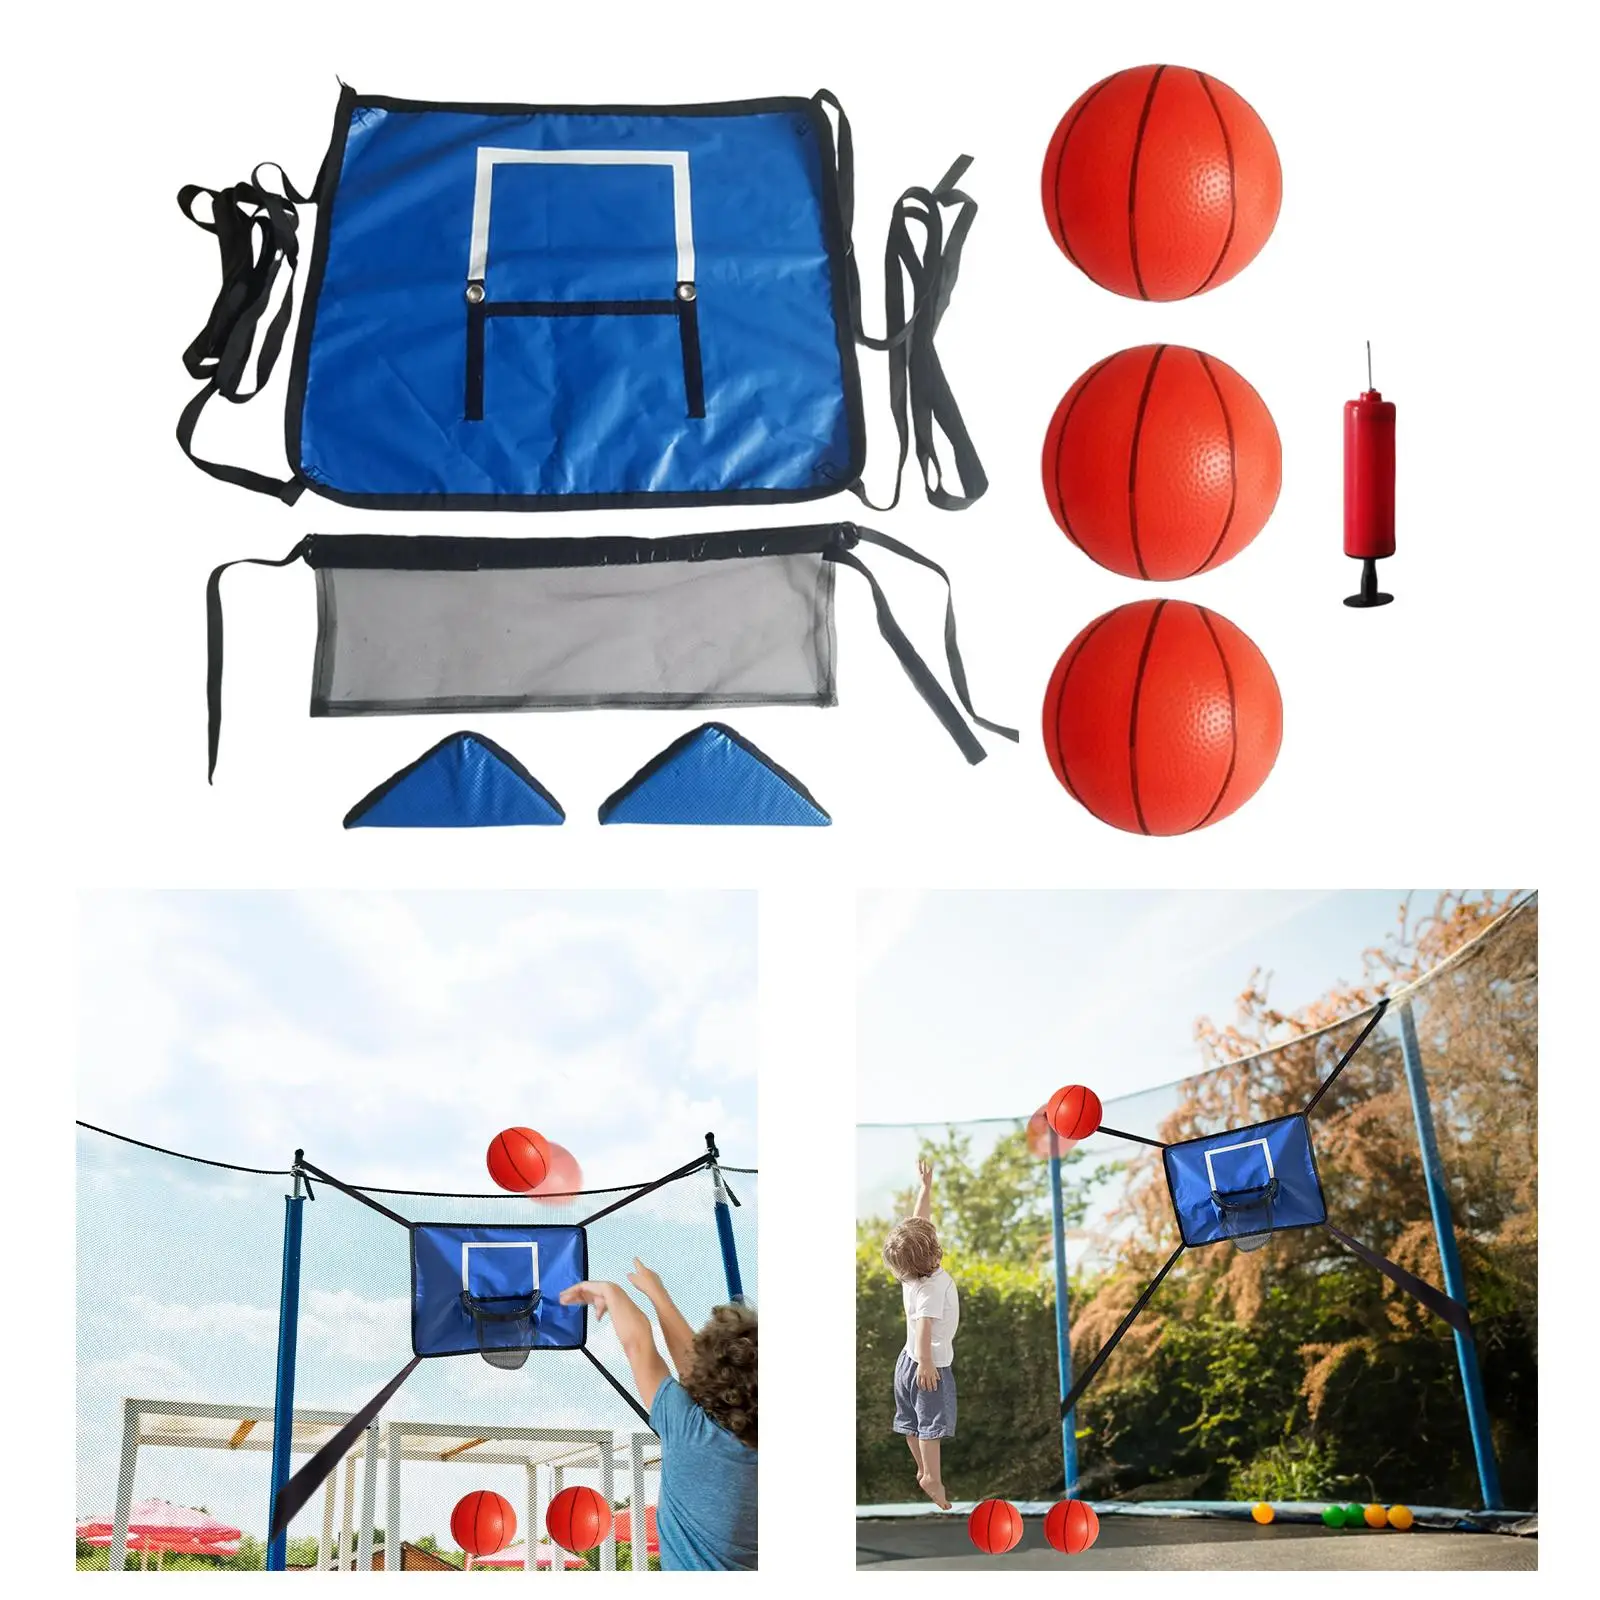 Mini Trampoline Basketball Hoop with Basketball and Pump Easy Installation Outdoor Sturdy for Kids Adults Lightweight Baseboard